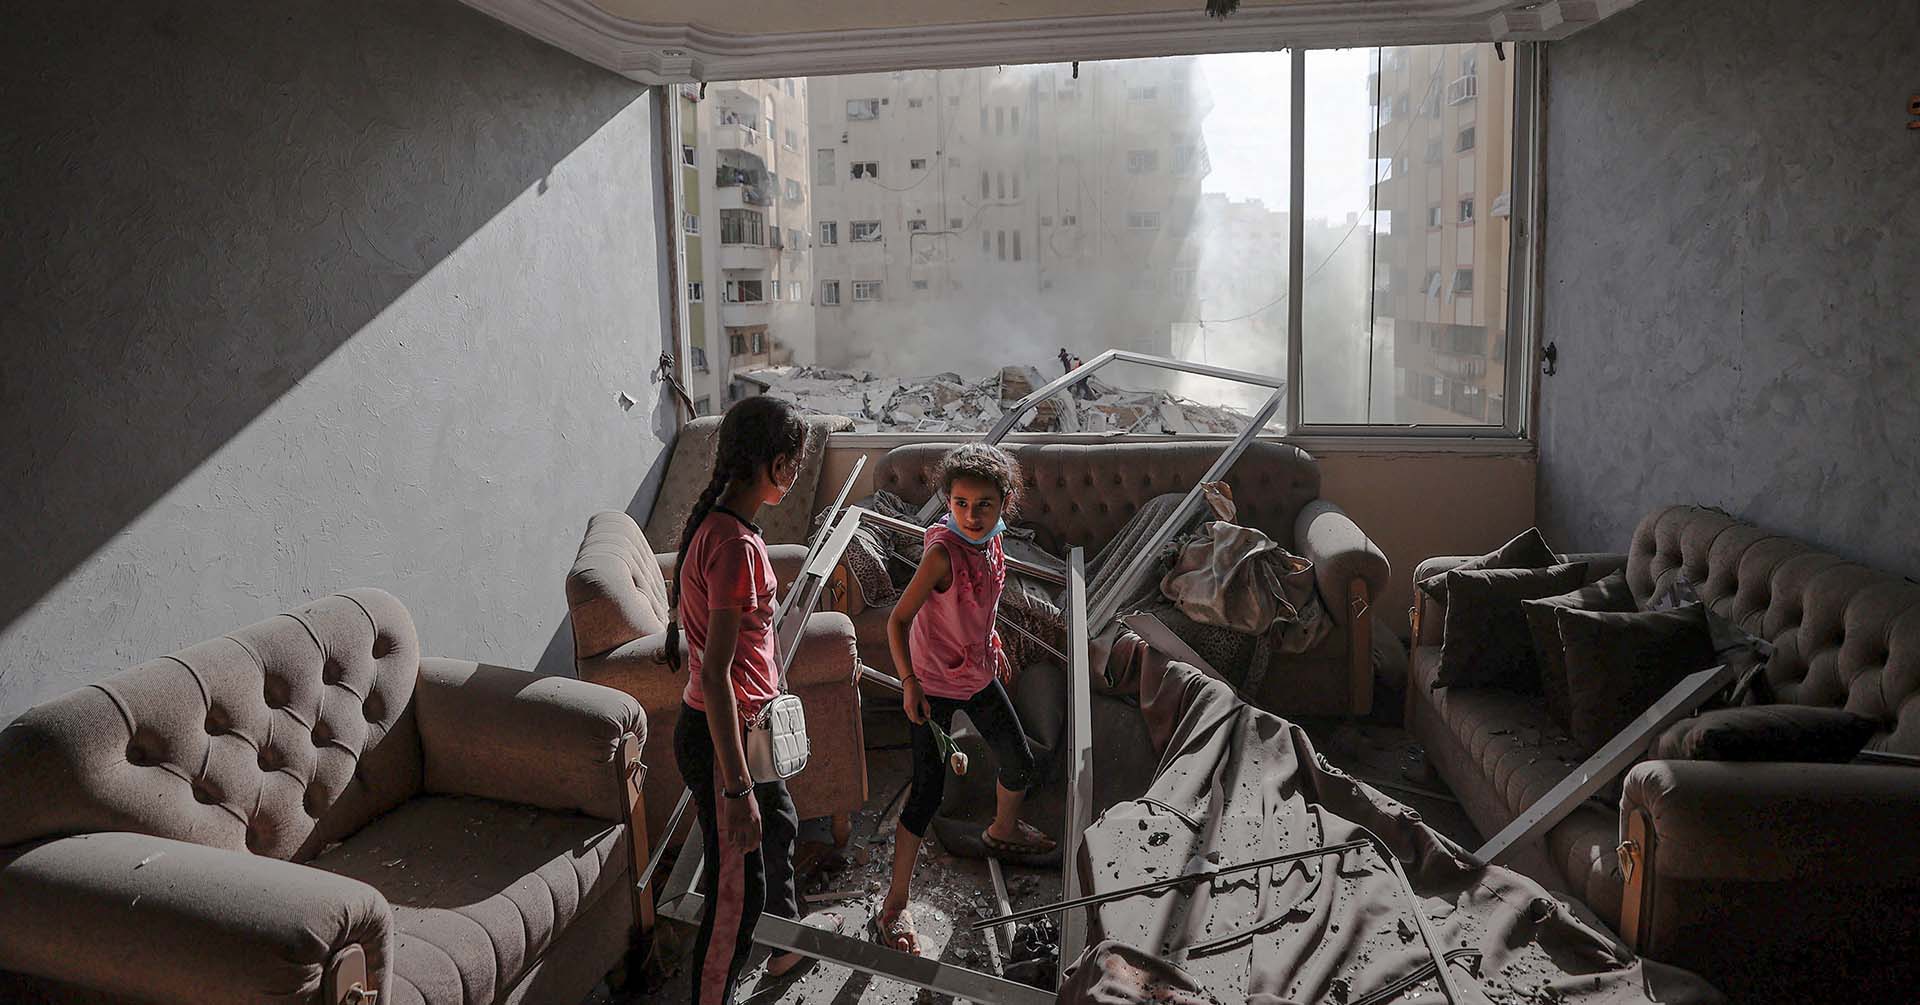 two children in gaza palestine standing in a room with a broken furniture and windows, with smoke filling the air outside window from debris and airstrikes